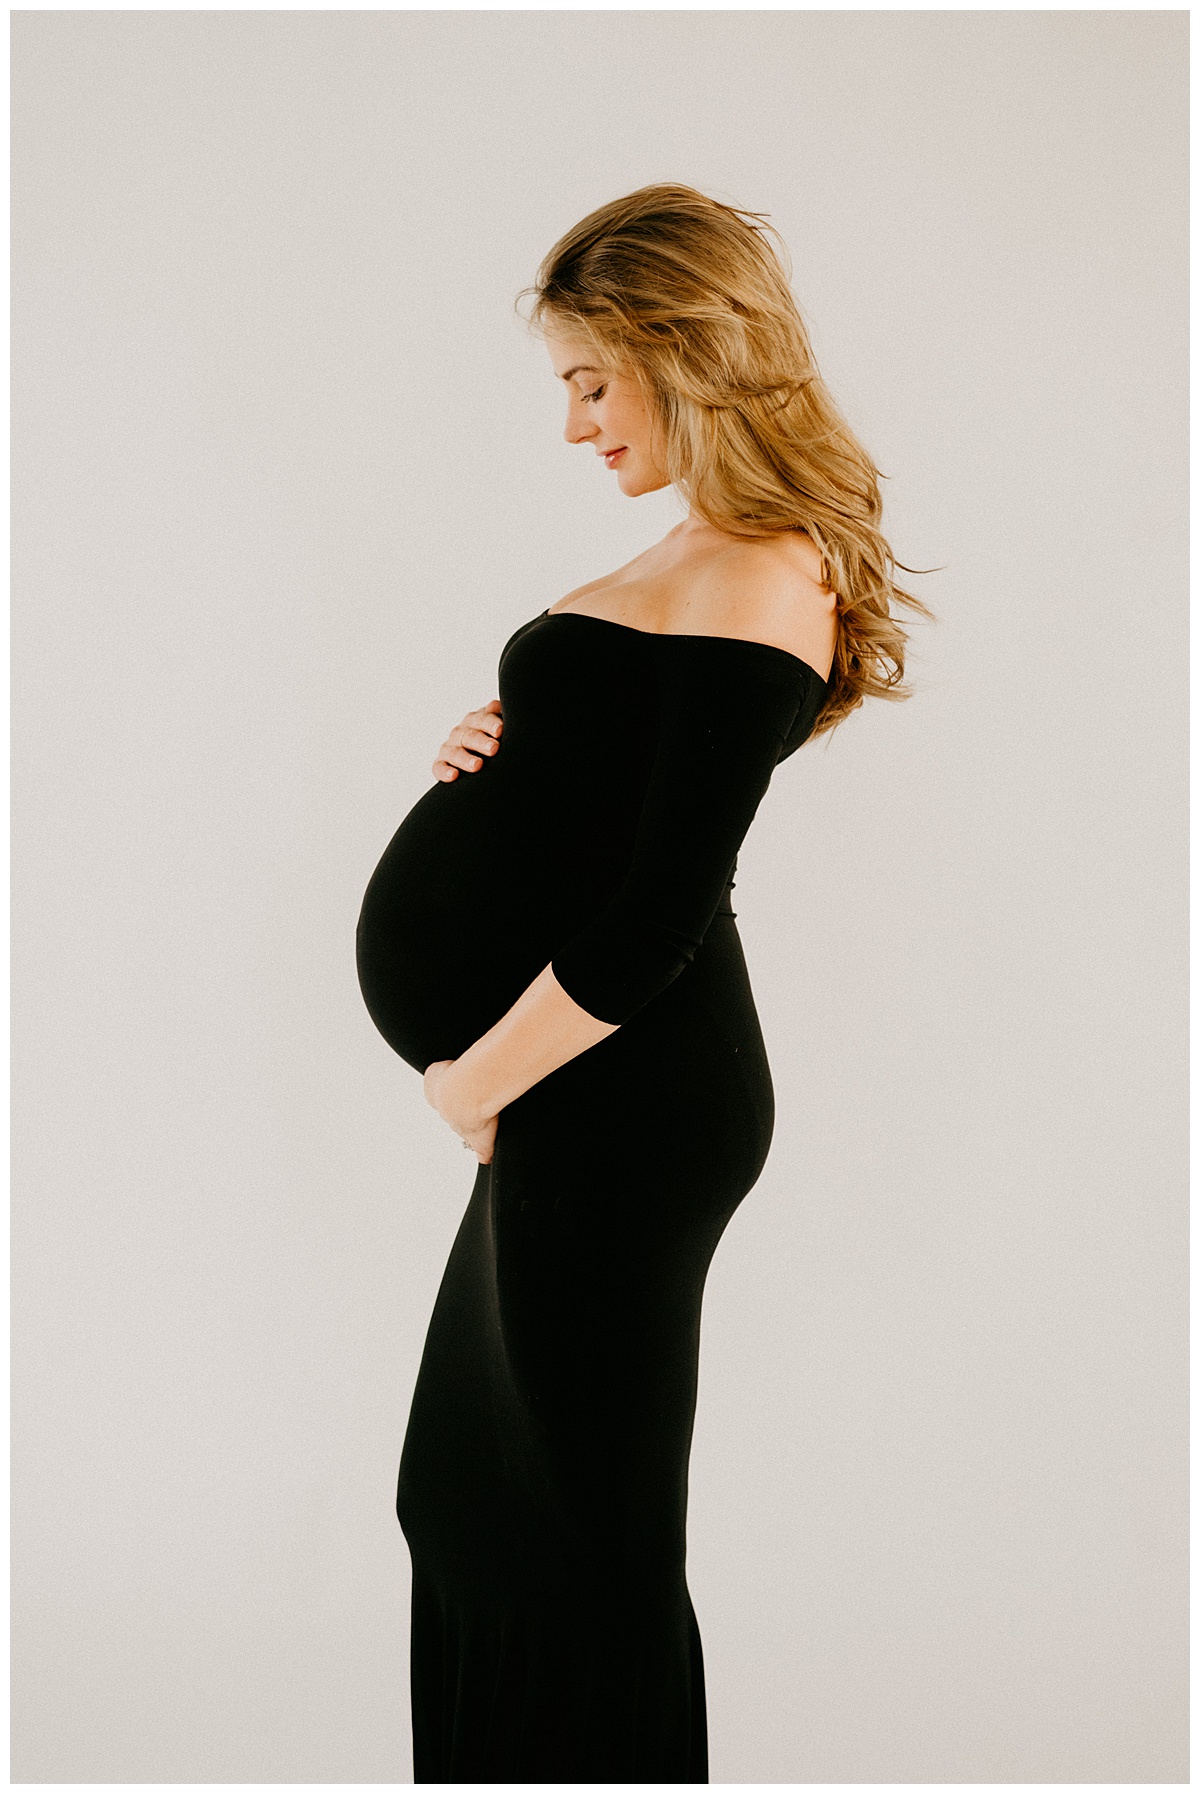 What to Wear for a Studio Maternity Photoshoot? 